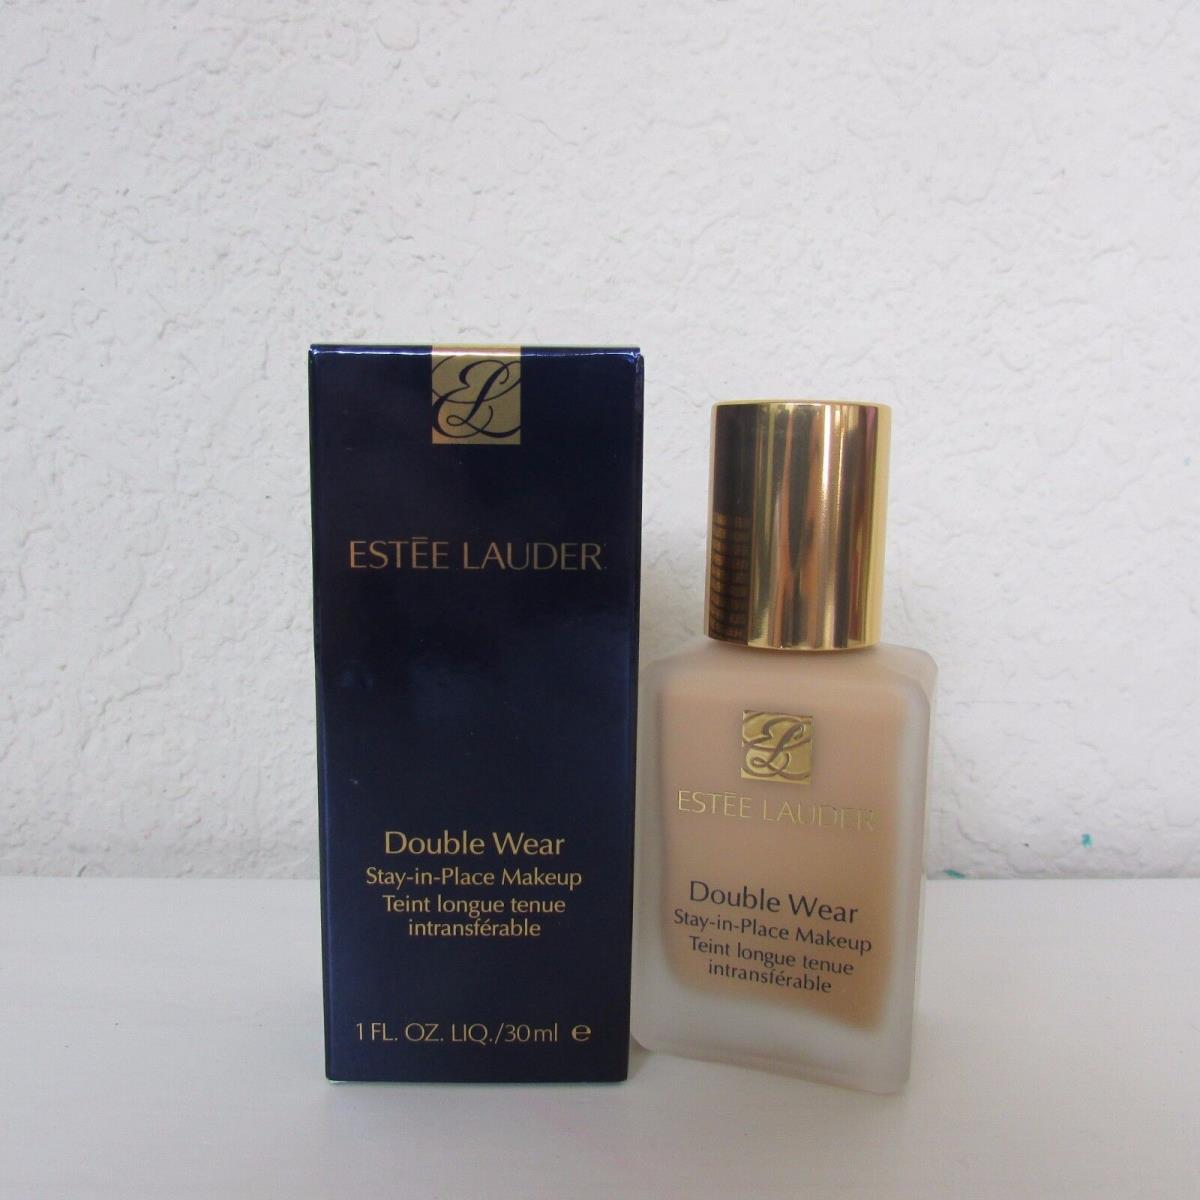 Estee Lauder Double Wear Stay-in-place Makeup Choose Your Shade 1.0 Oz/30 ml 2W1 Dawn